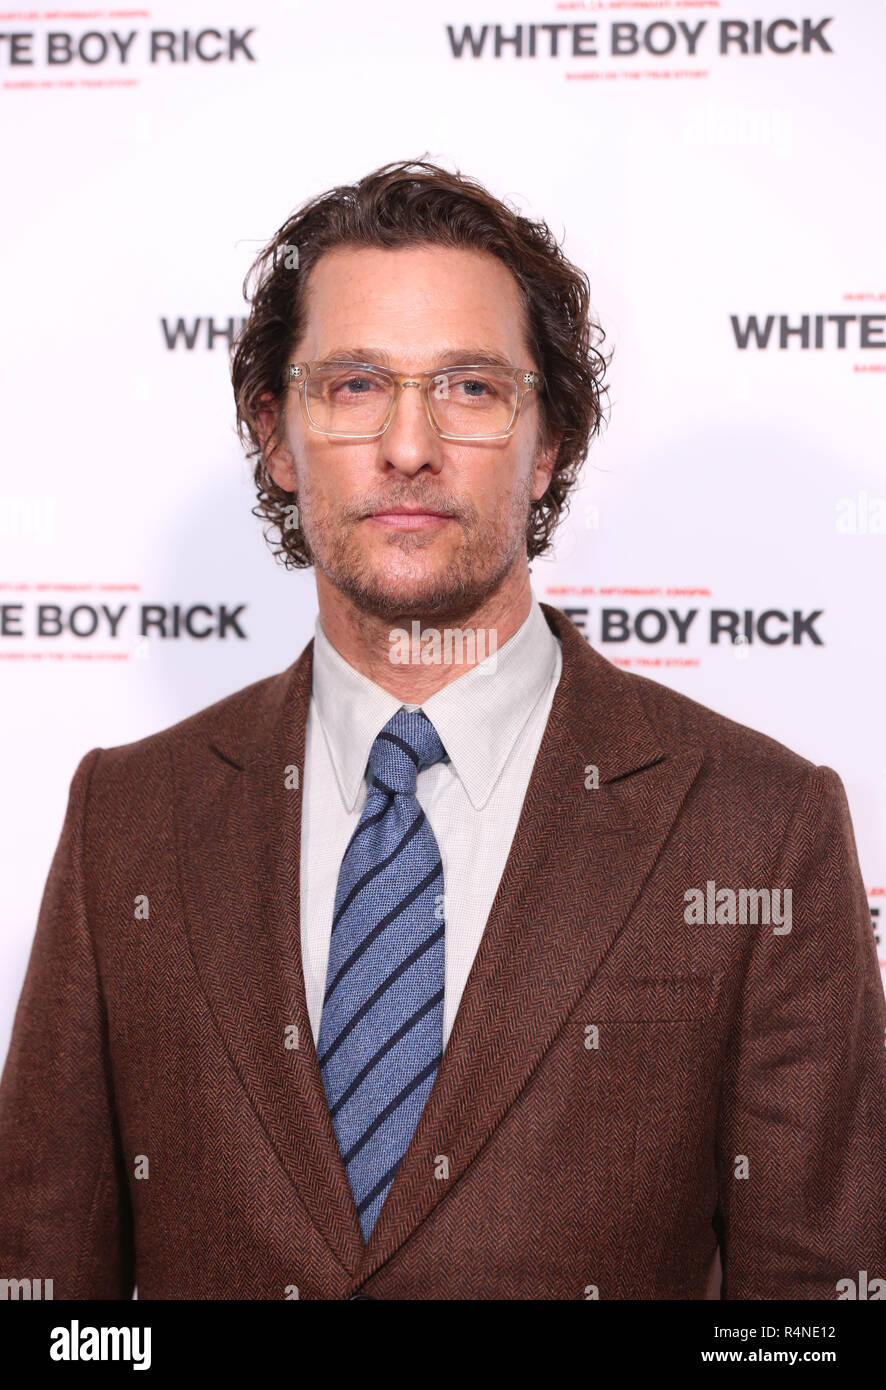 Actor Matthew McConaughey attends a special screening of White Boy Rick at the Picturehouse Central Cinema, London. Stock Photo